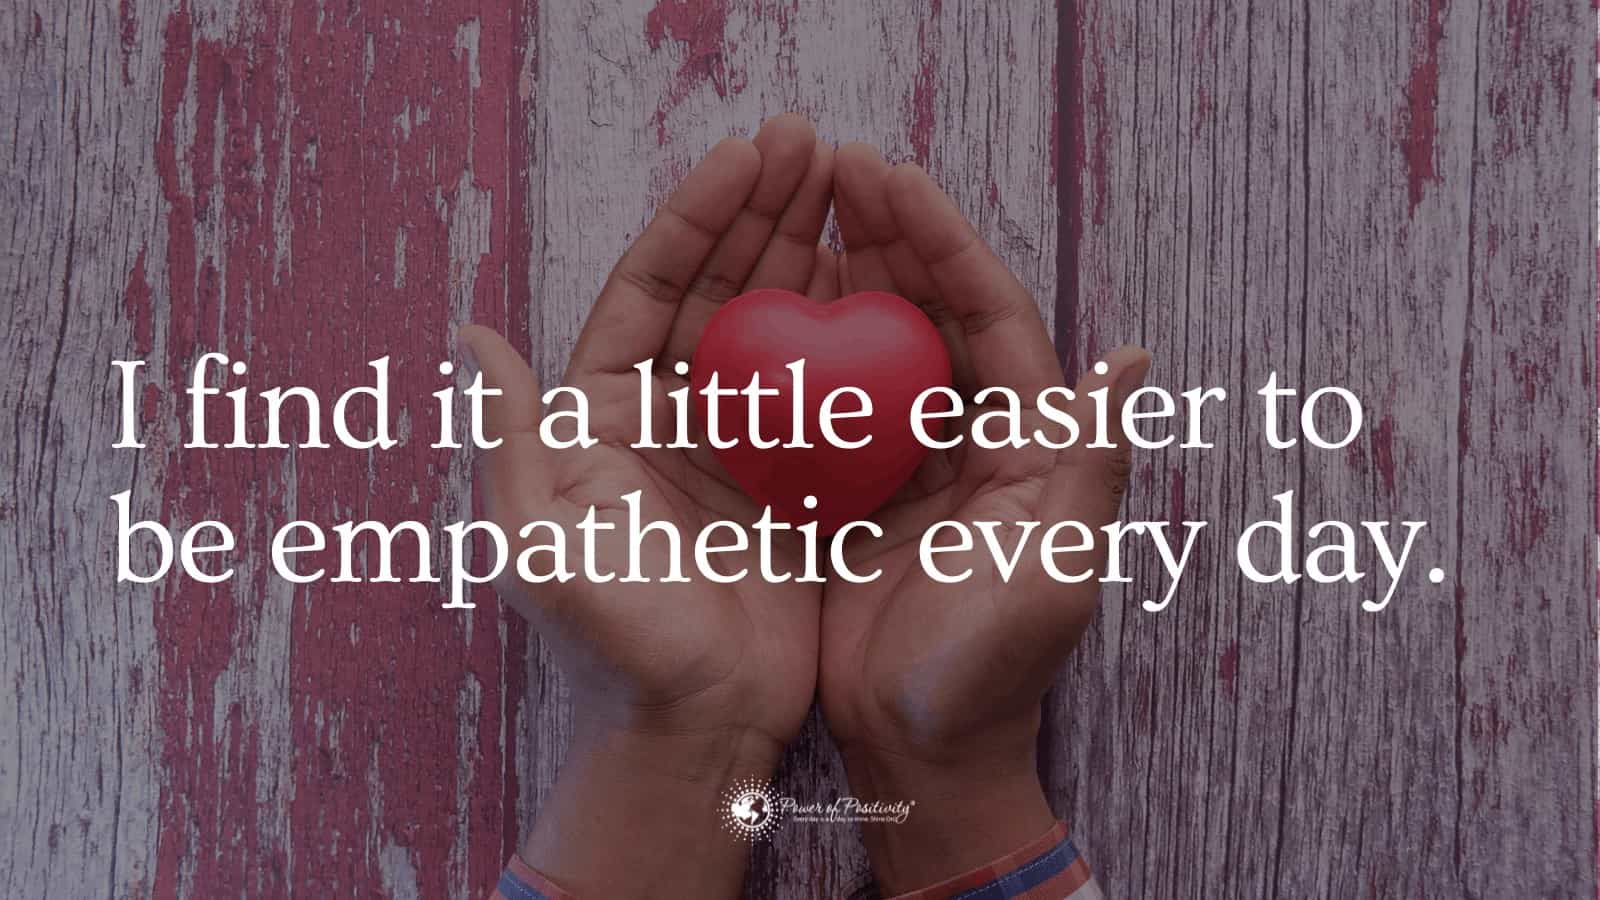 15 Daily Affirmations to Help You Empathize with Others